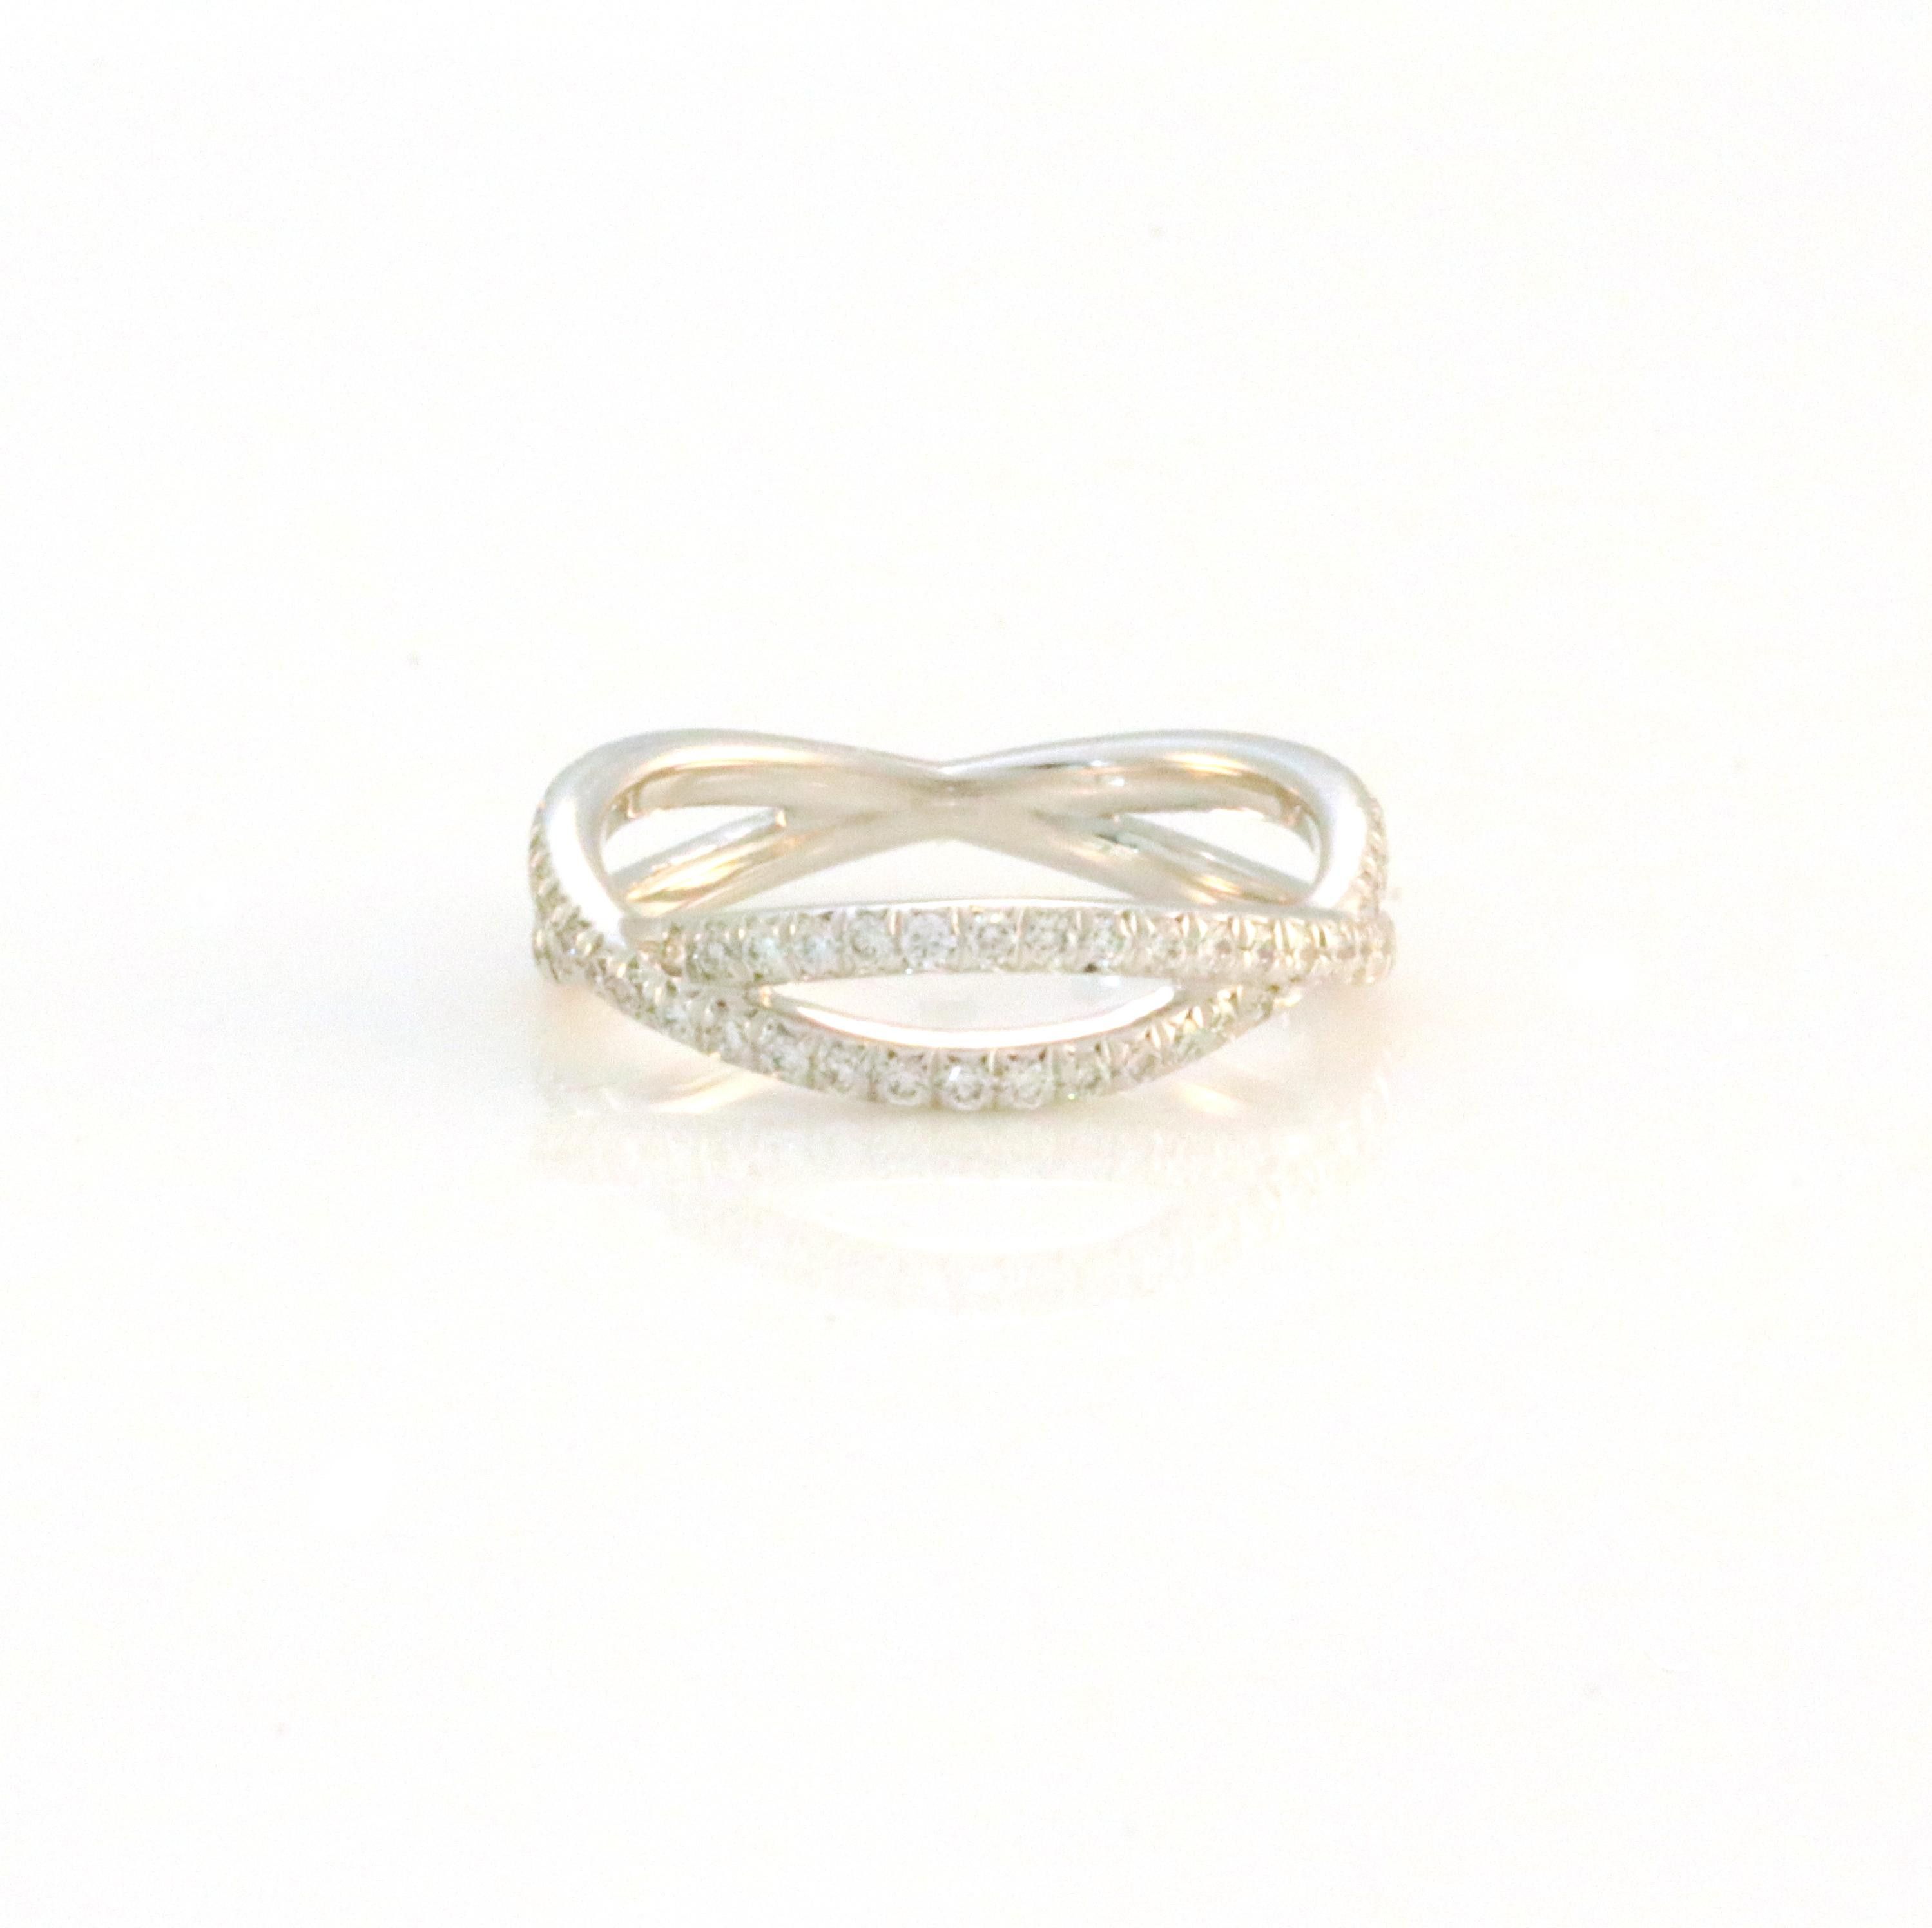 Criss Cross Ribbon Style 3 Section Micro Pave' Eternity Band Within Newest Ribbon Diamond Wedding Bands (View 4 of 25)